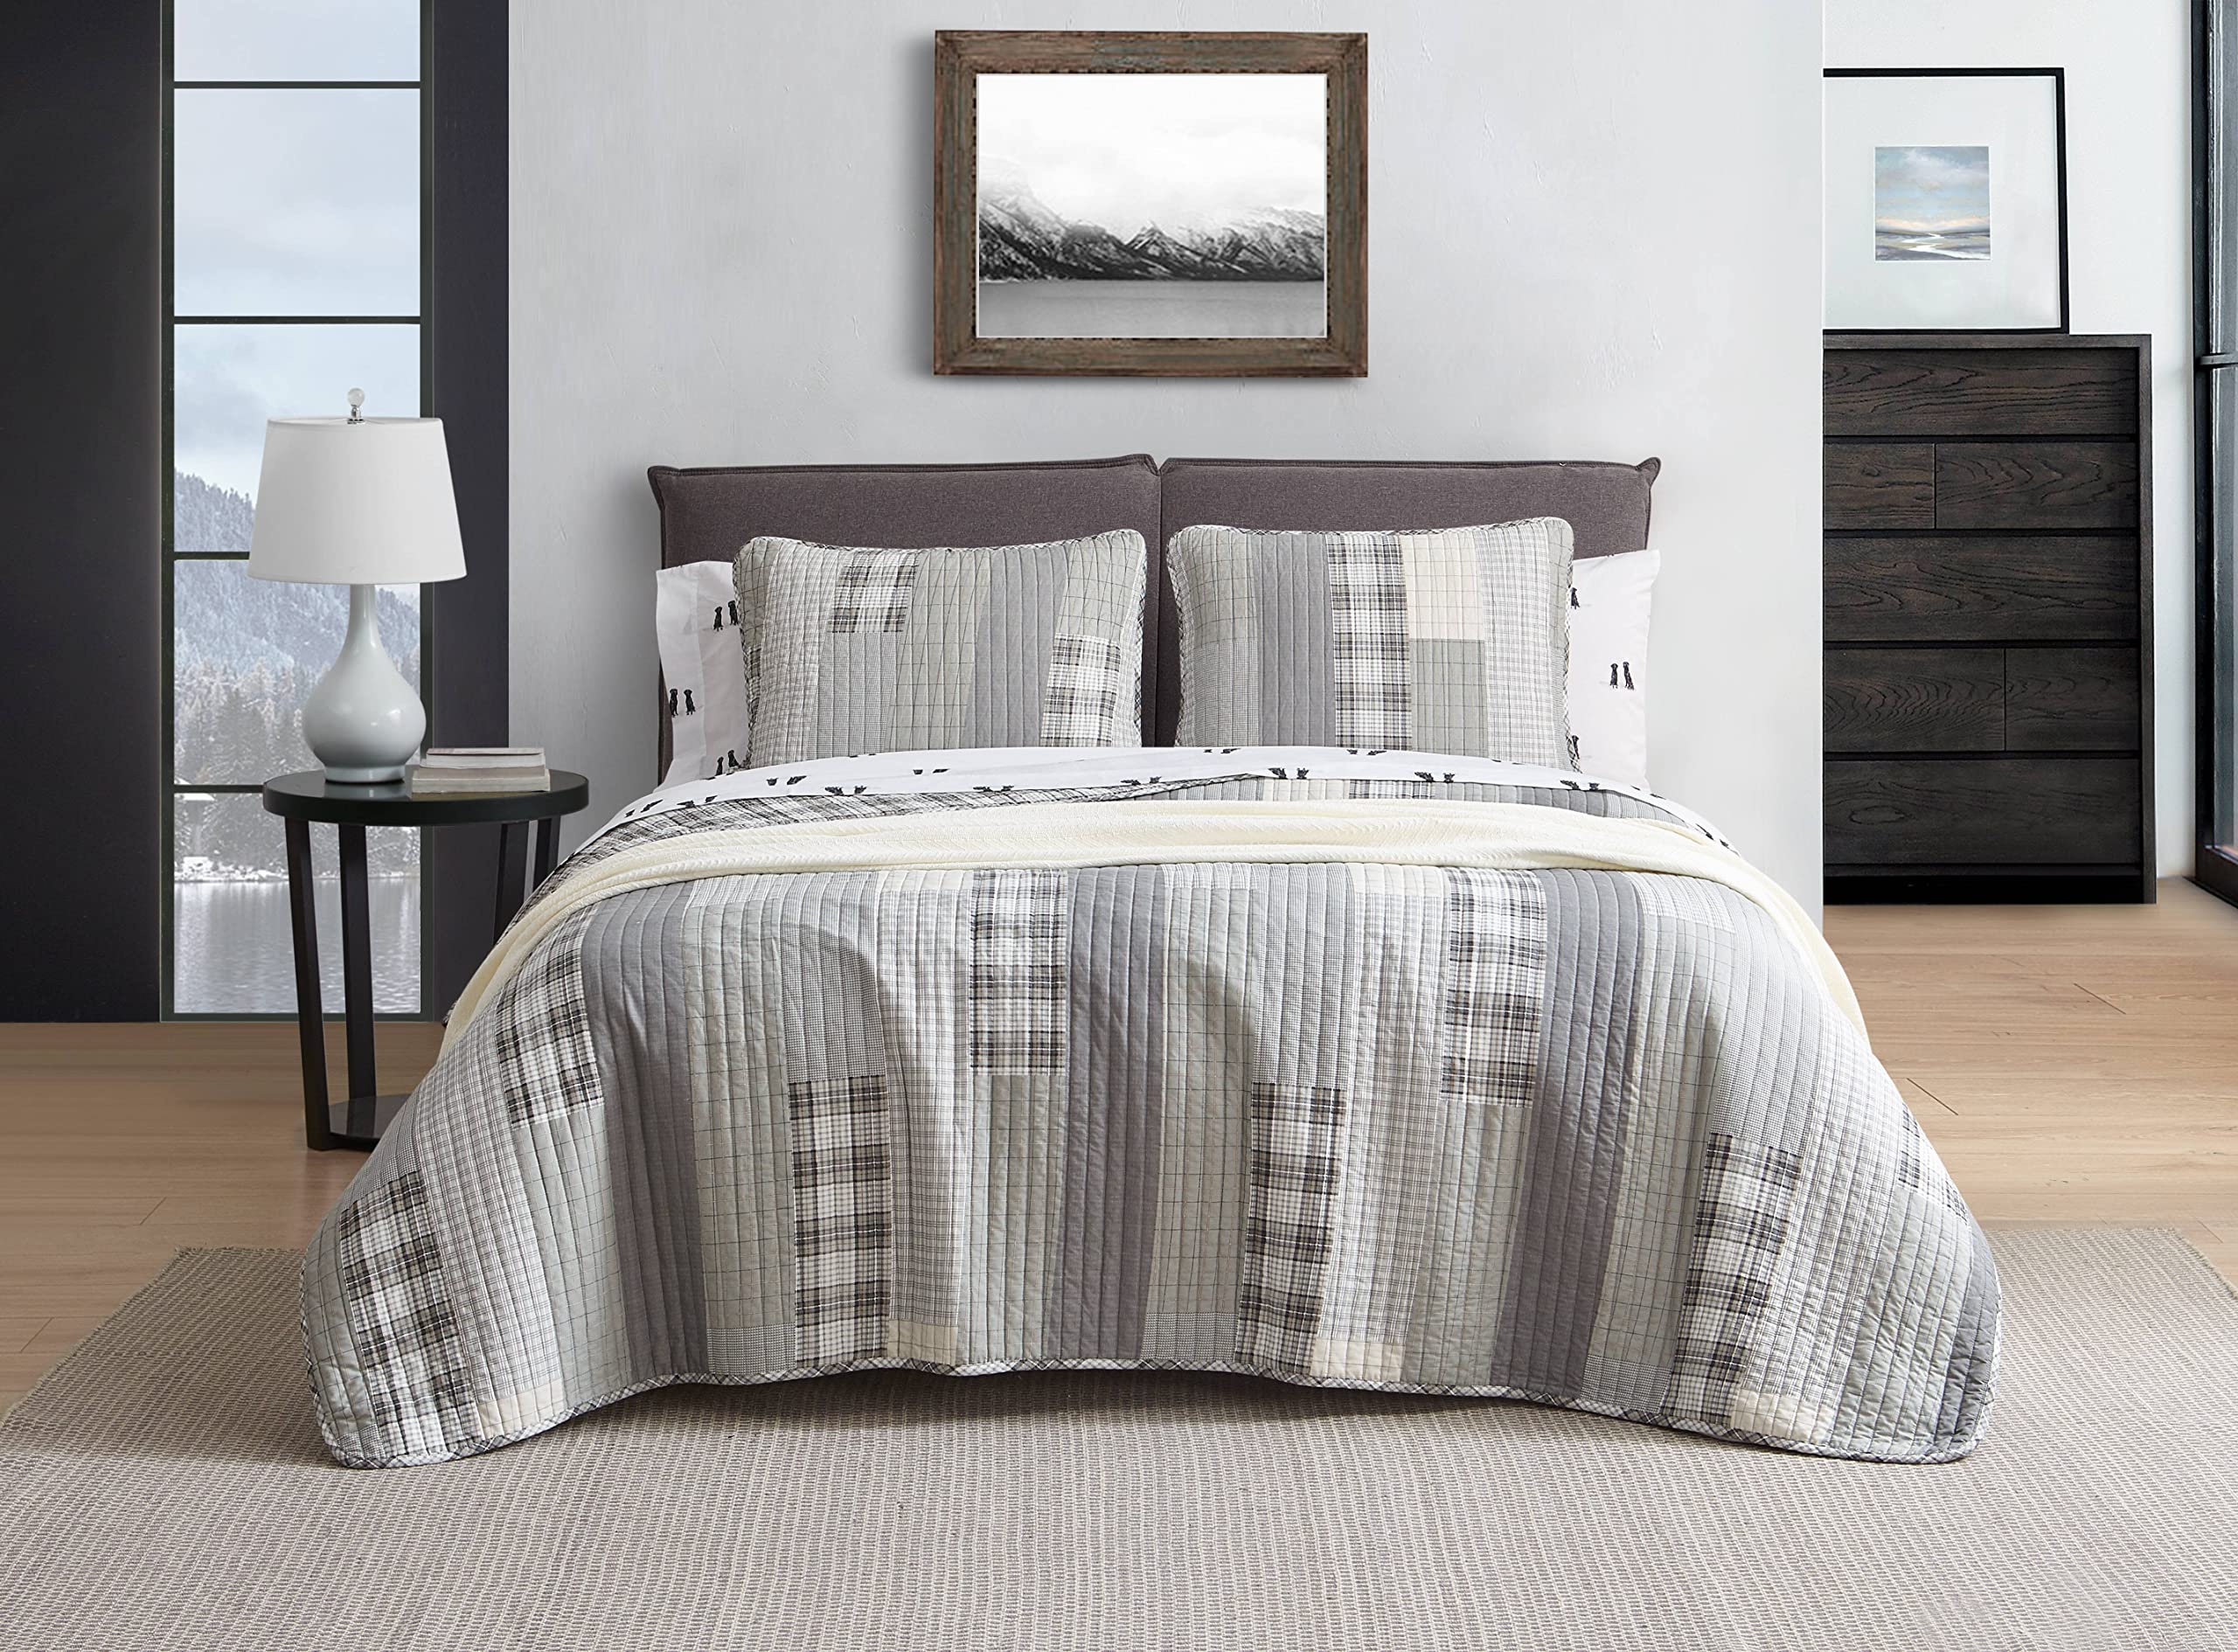 Book Cover Eddie Bauer Home - Queen Quilt Set, Cotton Reversible Bedding with Matching Shams, Home Decor for All Seasons (Fairview Grey, Queen) Fairview Grey/Ivory Queen